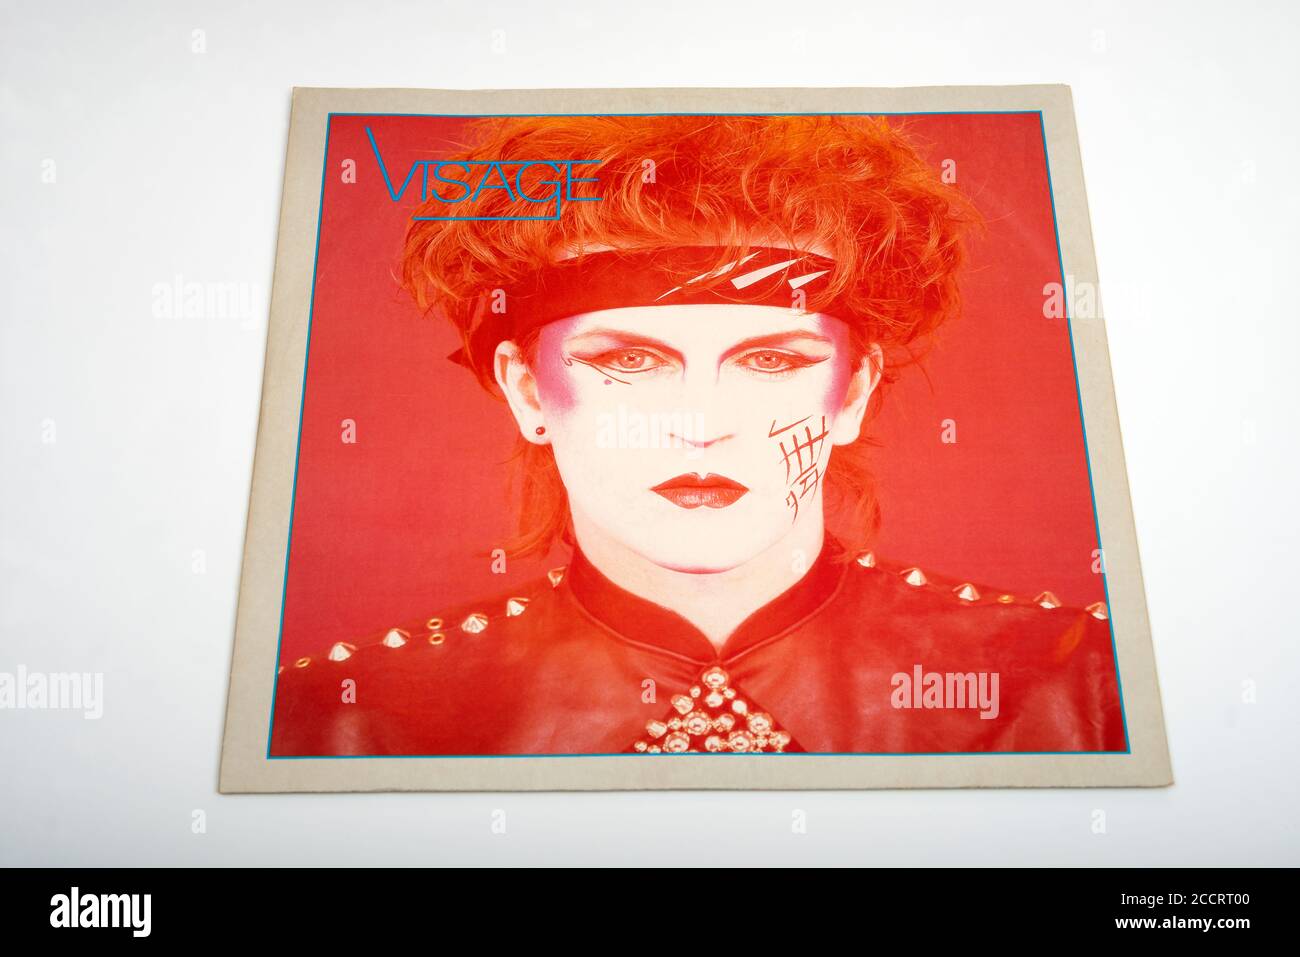 Visage EP (Extended Play) vinyl record from the 1980's New Romanic era  Stock Photo - Alamy